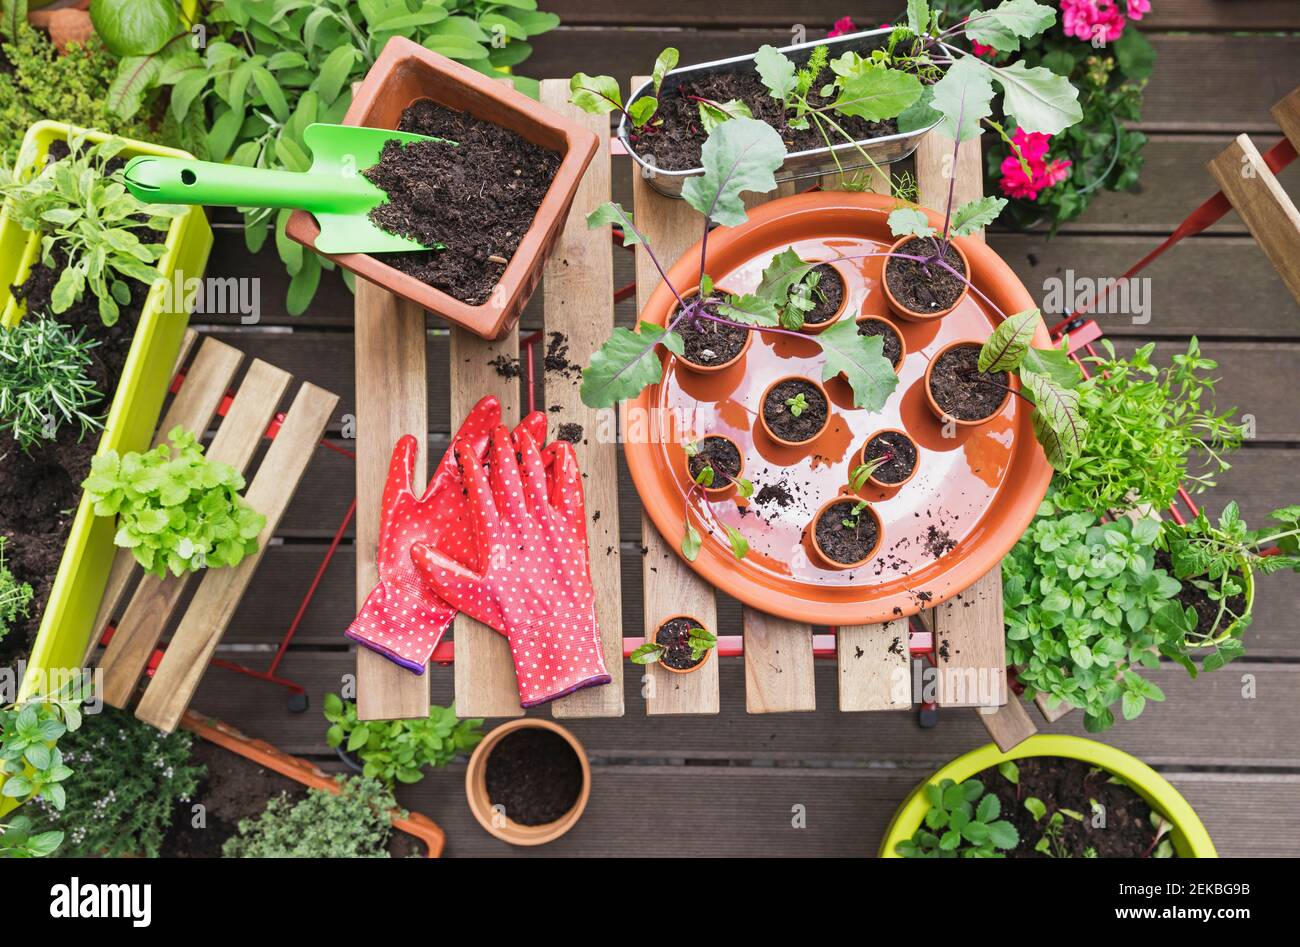 Herbs and vegetables cultivated on balcony garden Stock Photo